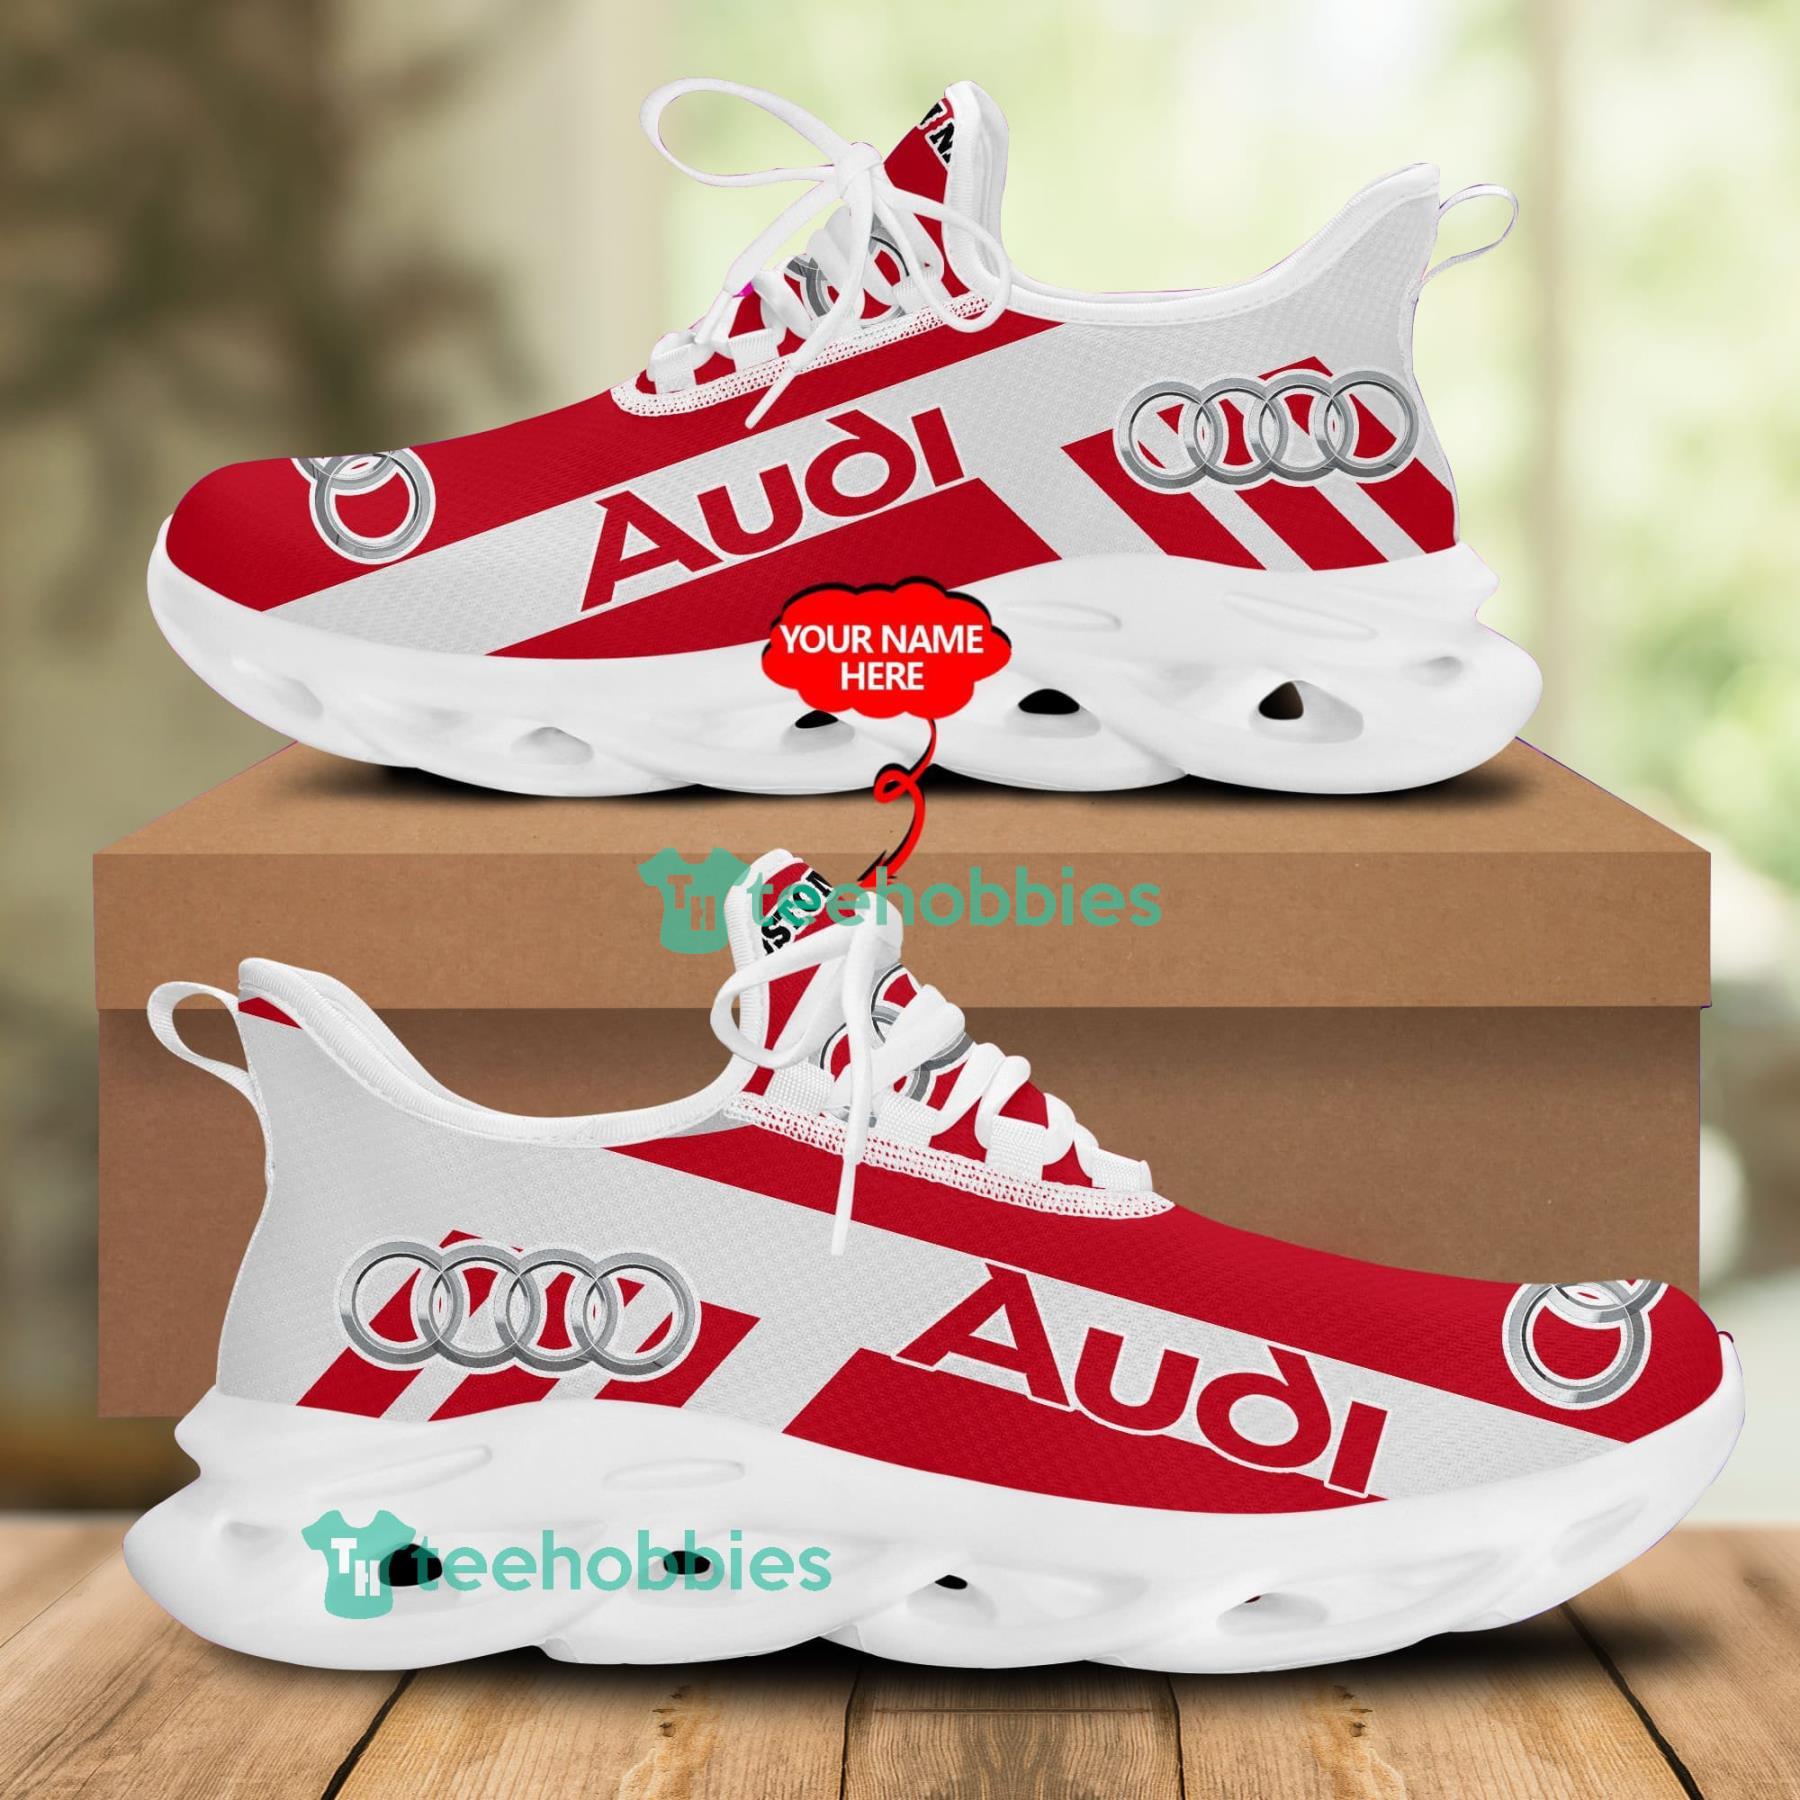 Audi Limited Max Soul Sneaker Personalized Name